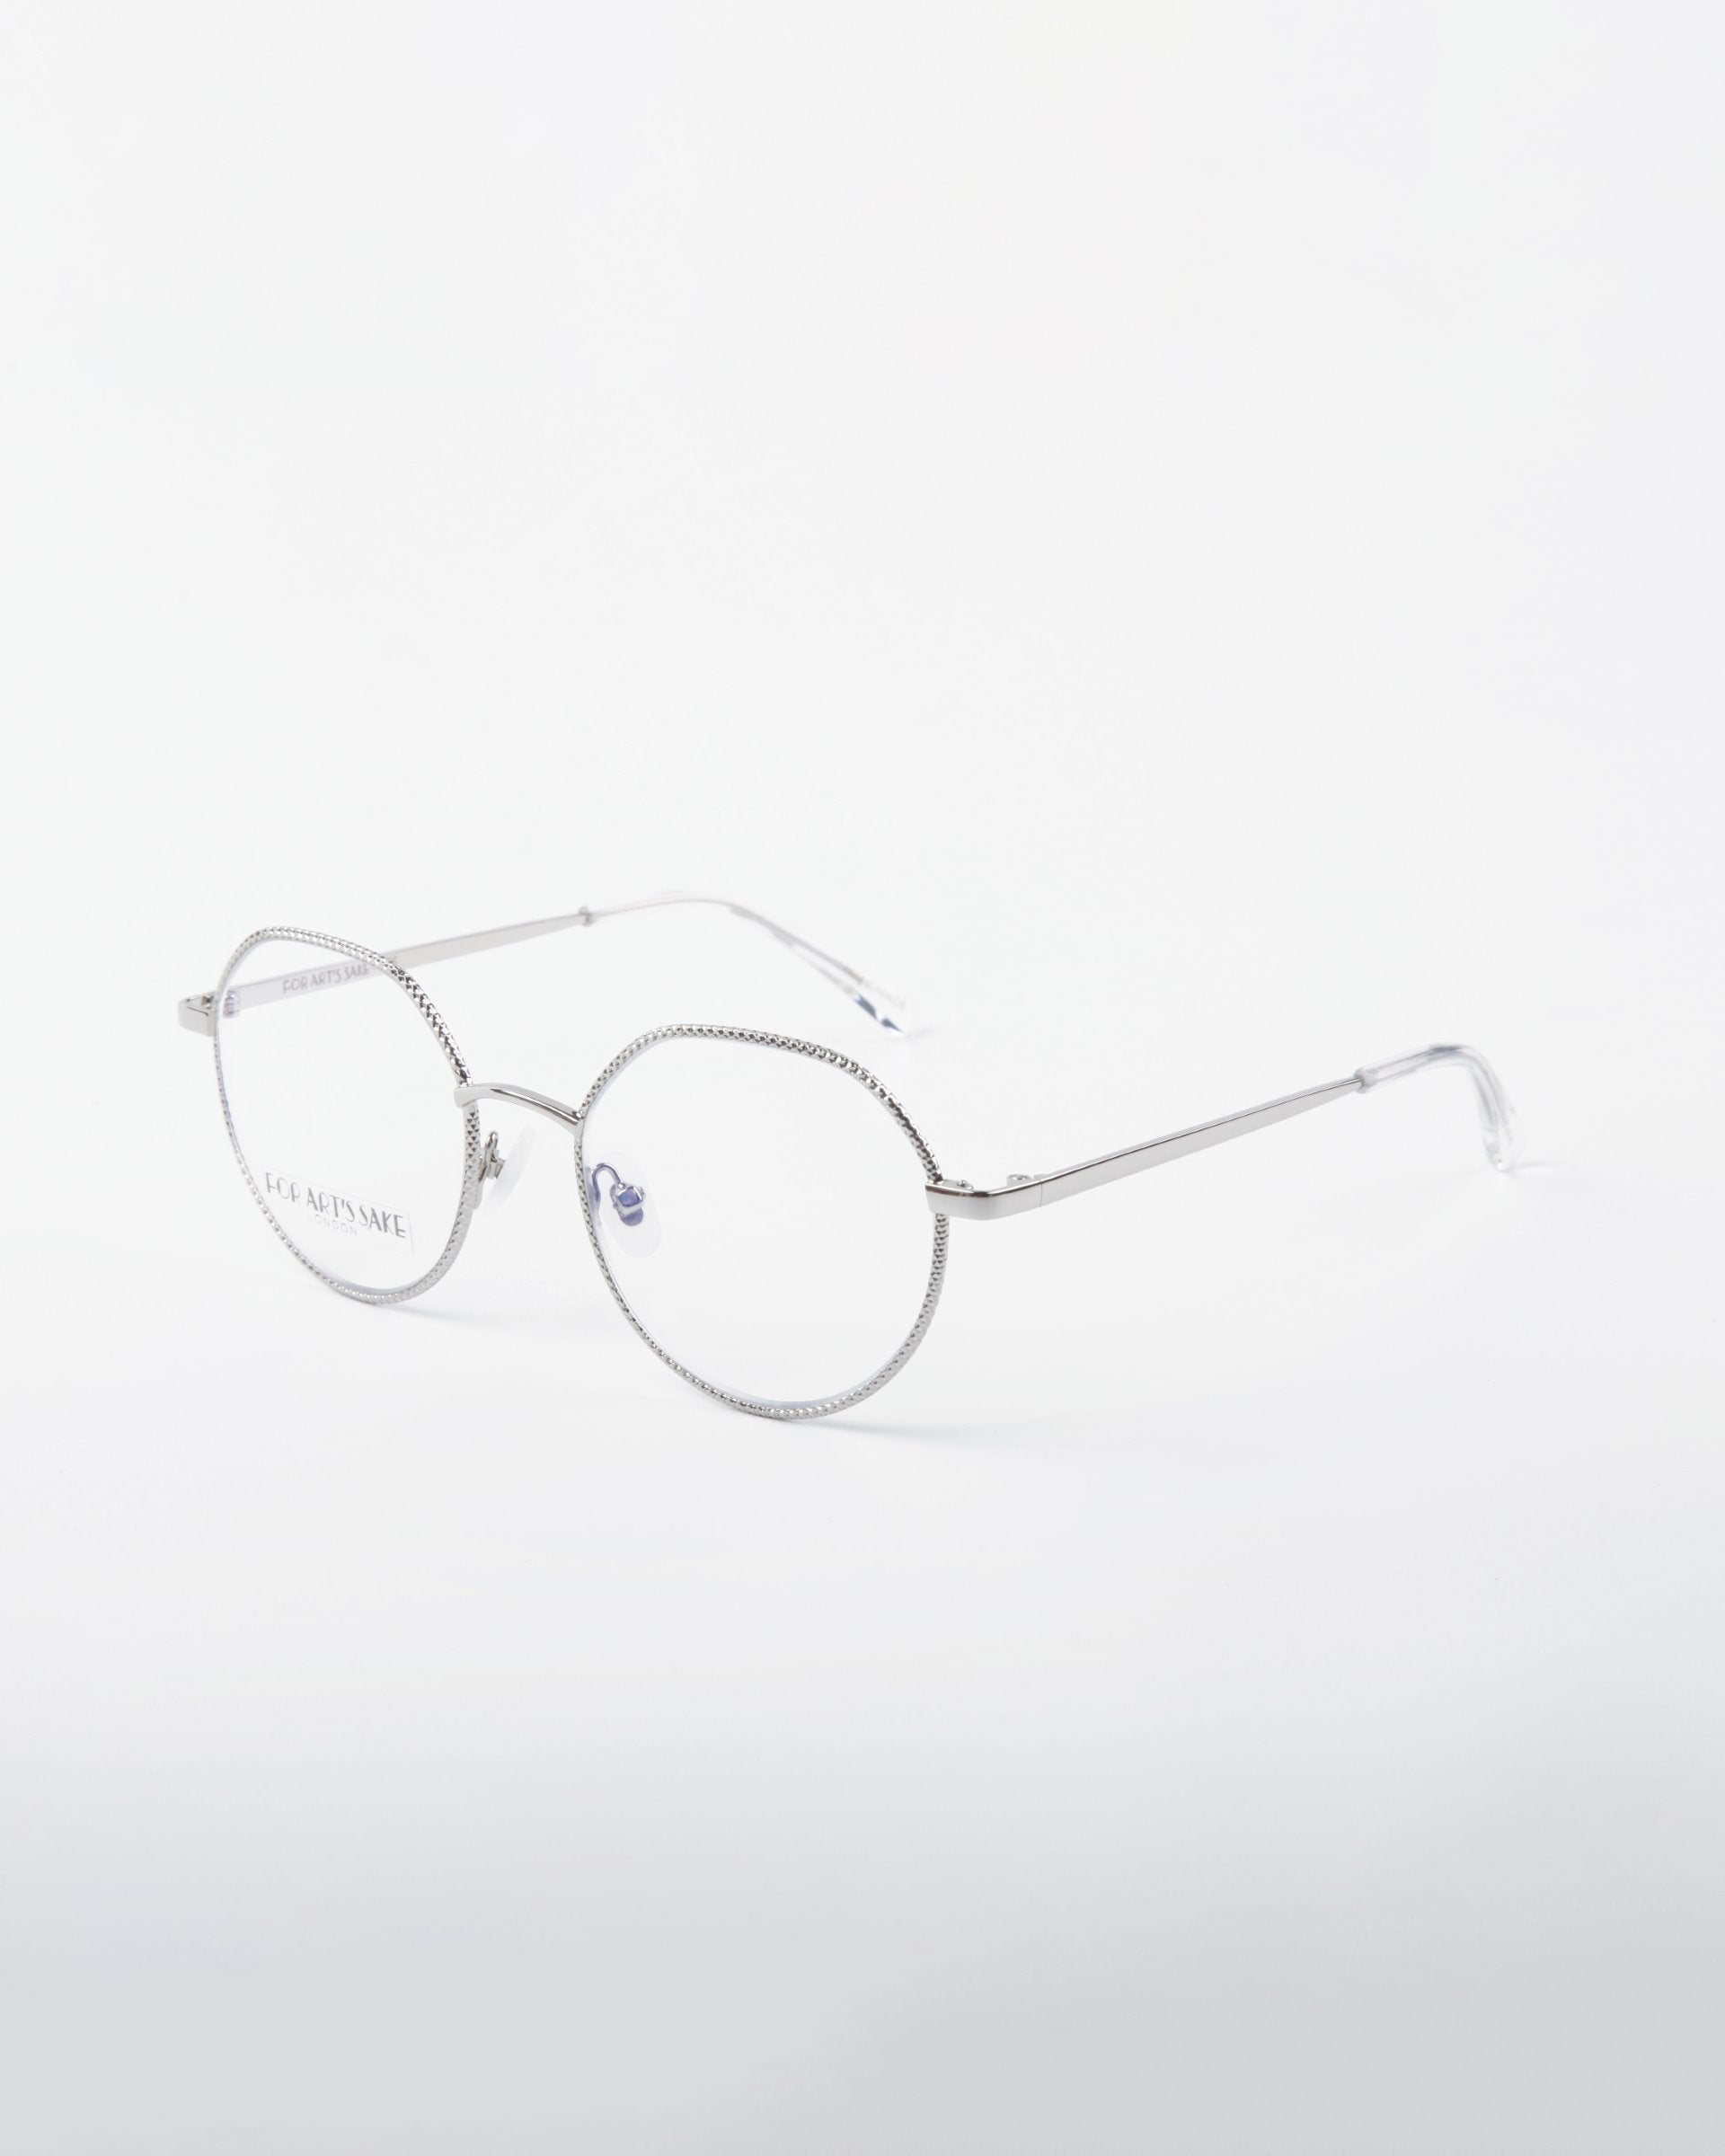 A pair of Hope eyeglasses by For Art's Sake® with round lenses and thin, 18-karat gold-plated arms. The frame features a subtle textured pattern around the lenses. The background is plain white, making the eyeglasses the focal point of the image.